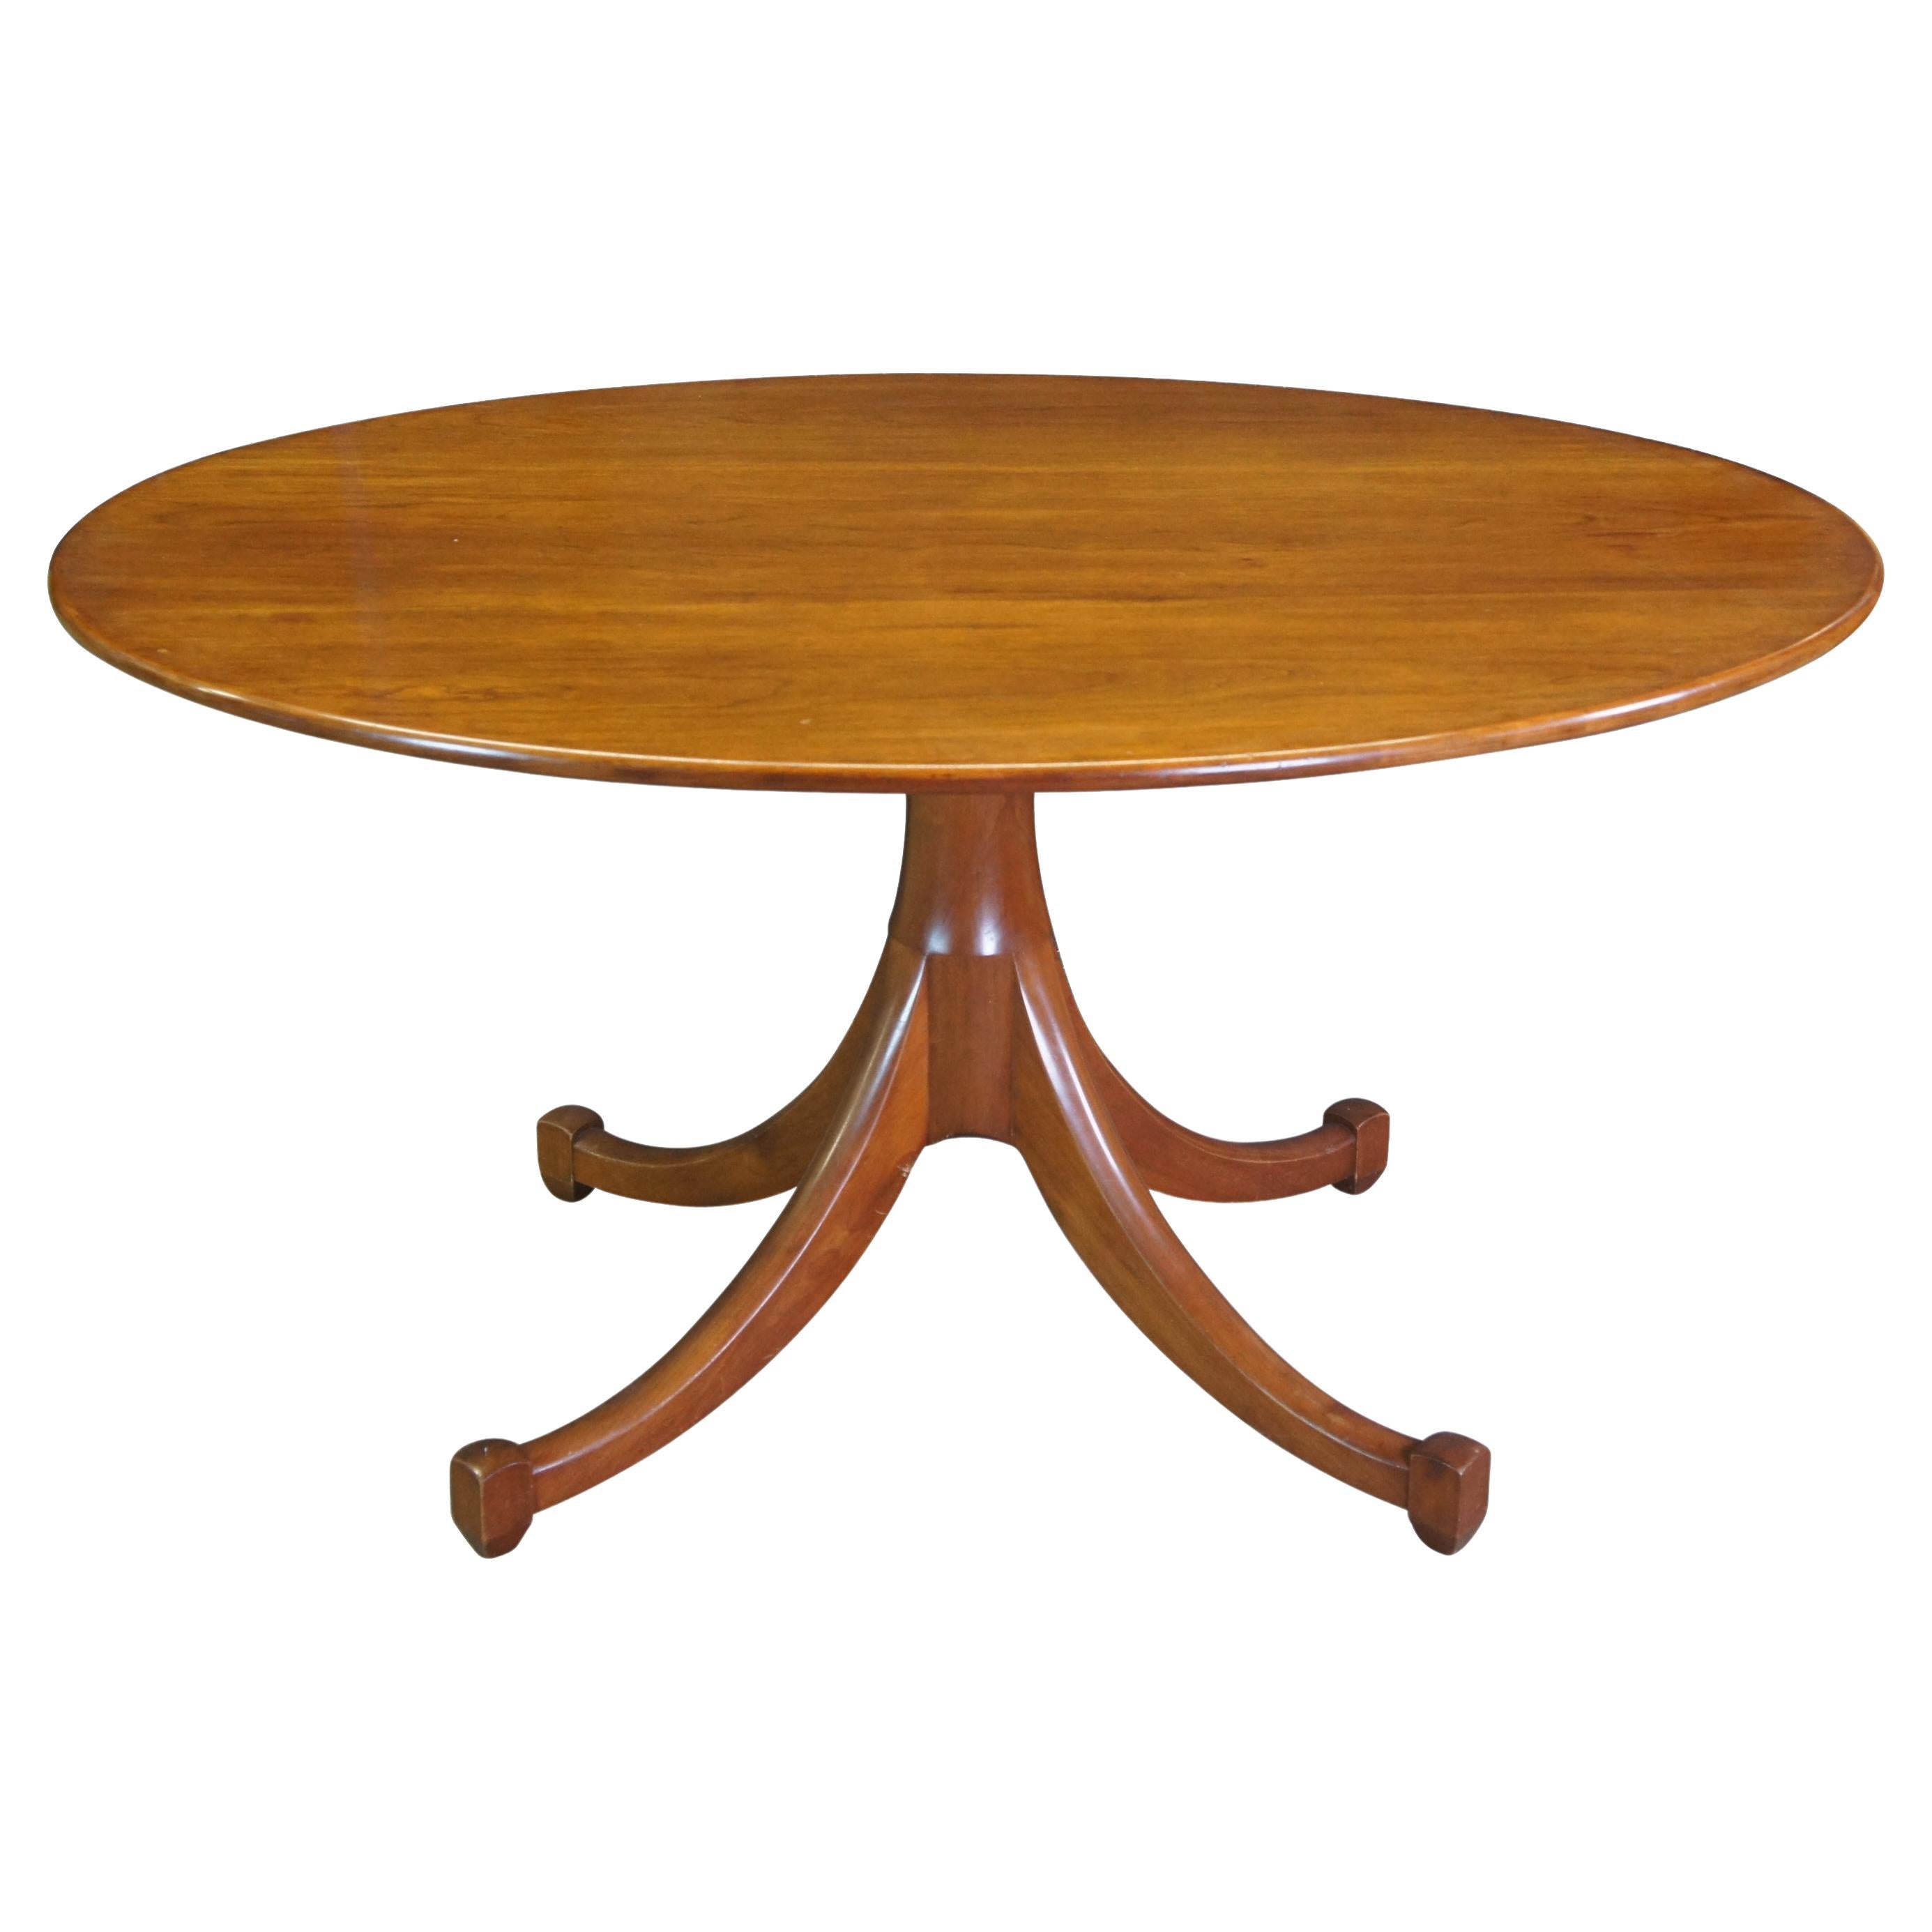 20th C. Handmade Colonial Williamsburg Oval Cherry Pedestal Dining Center Table